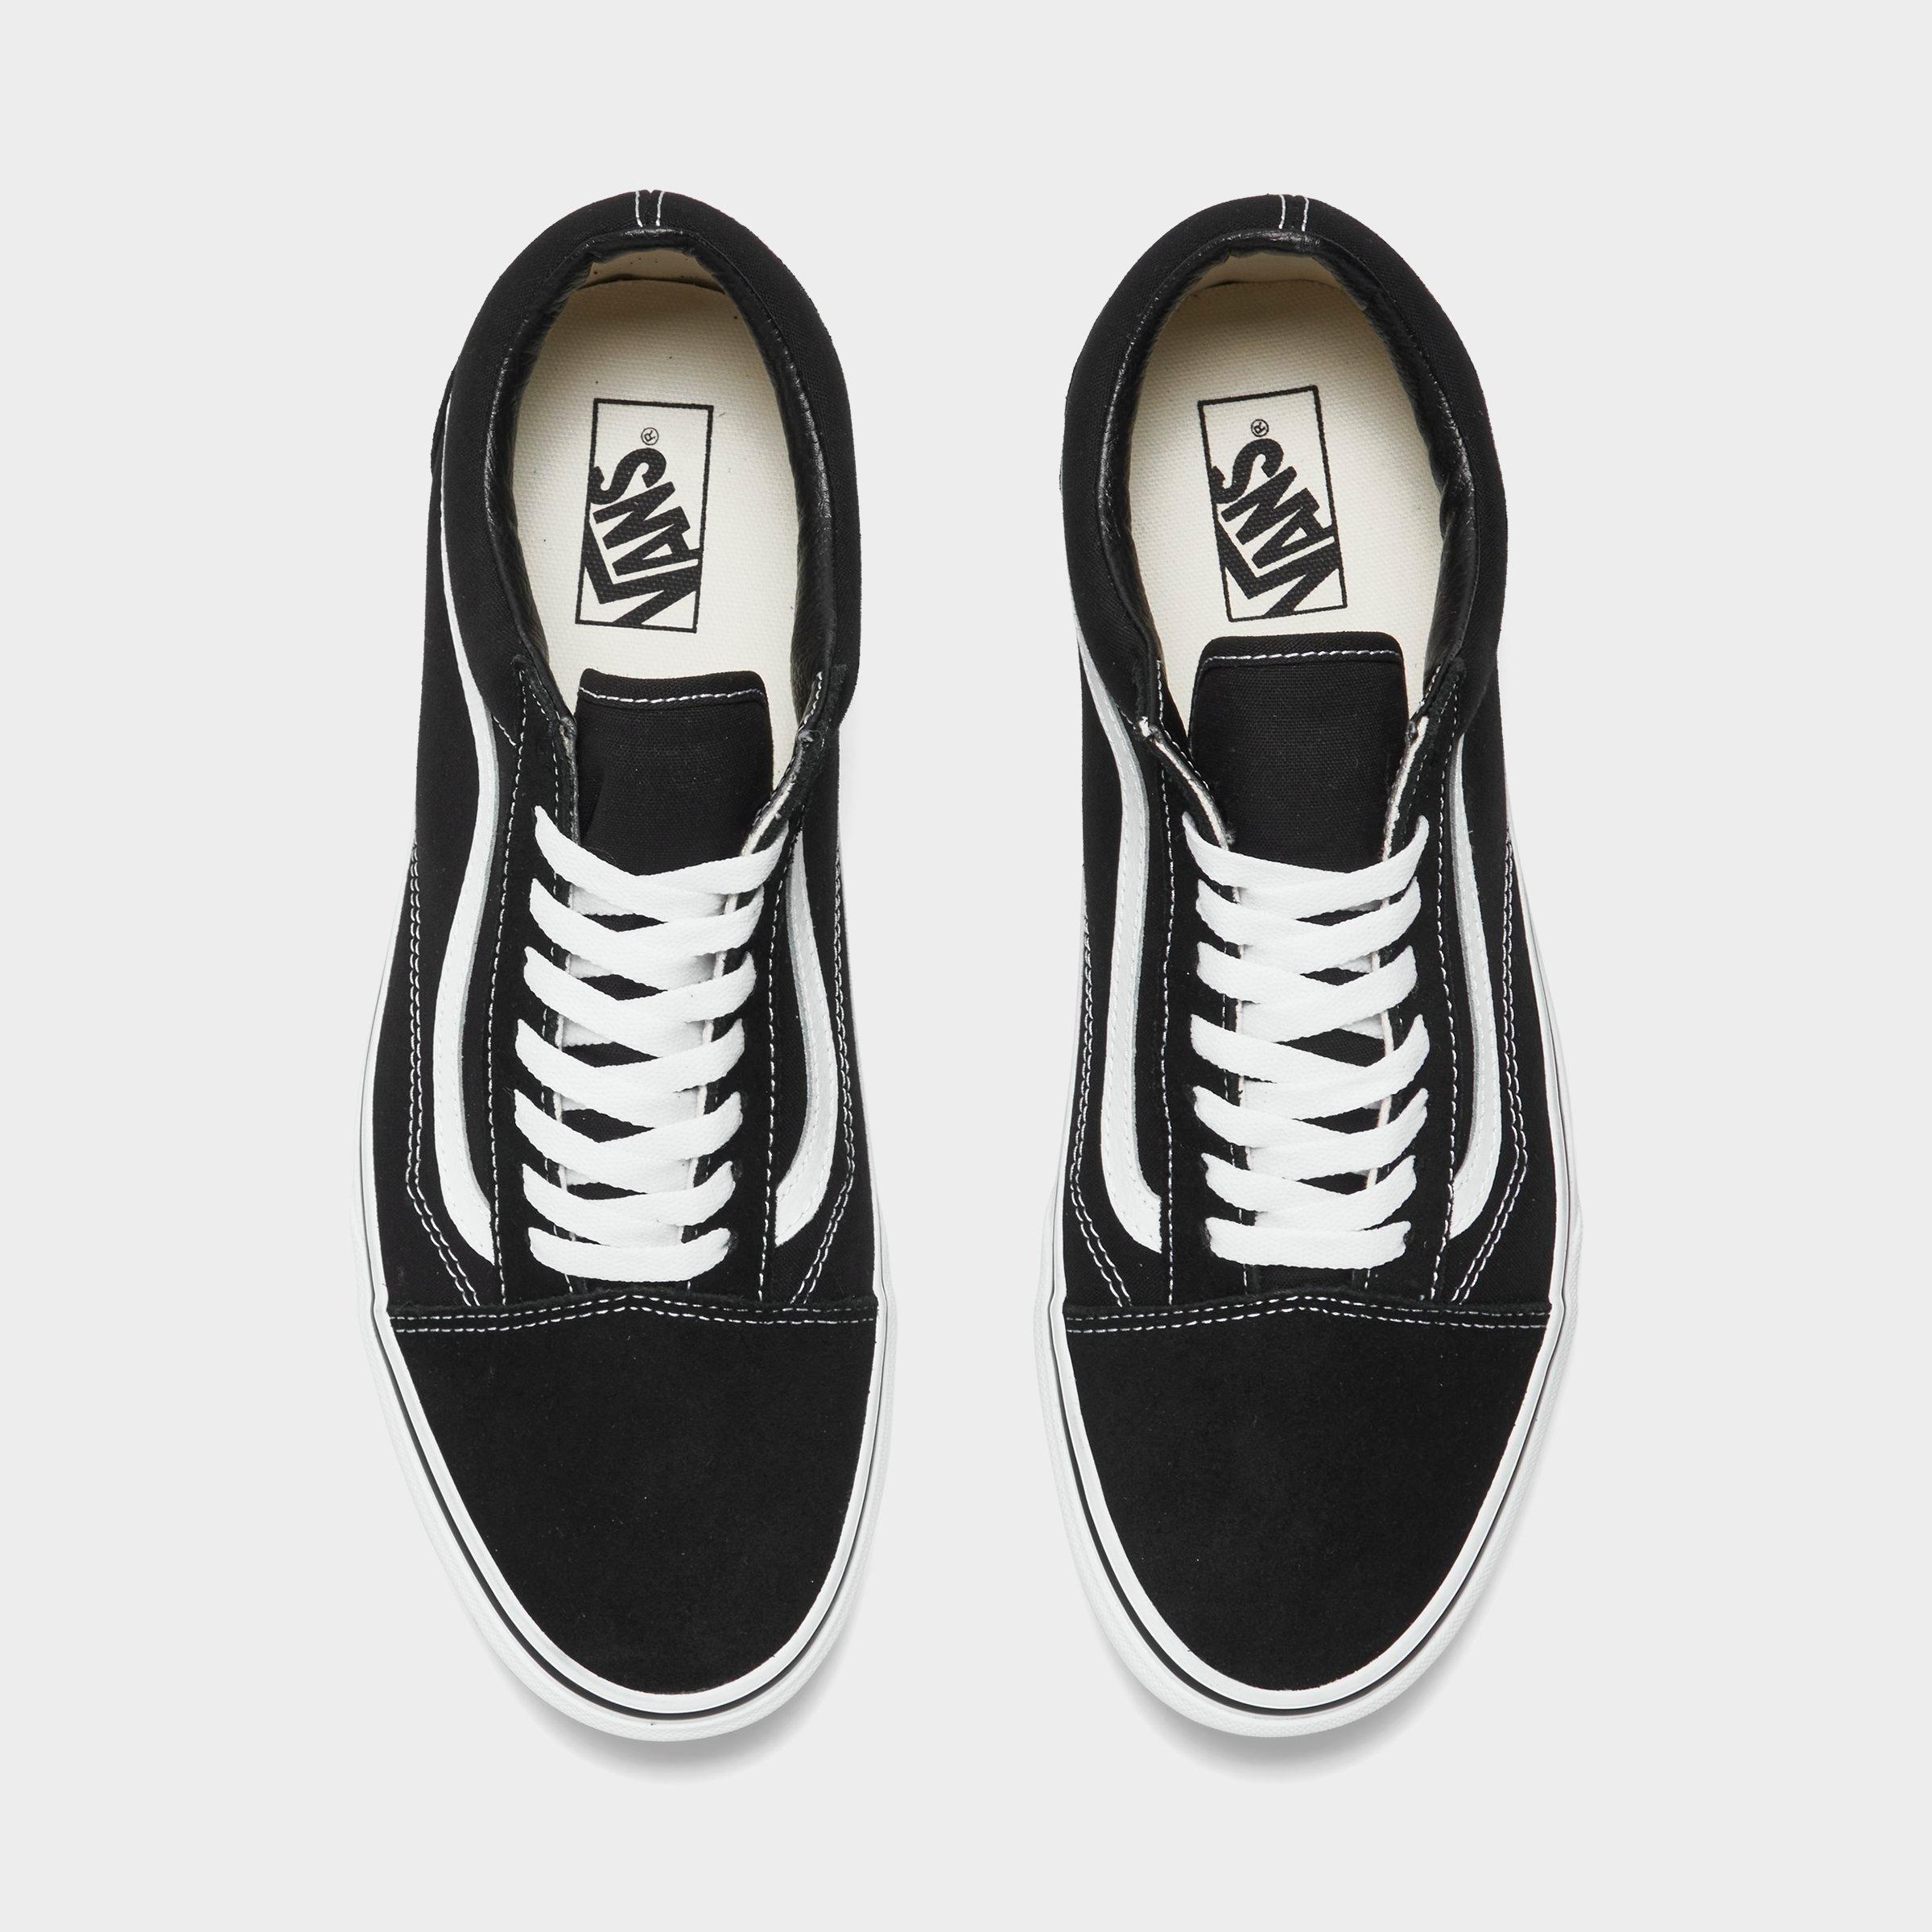 are vans casual shoes